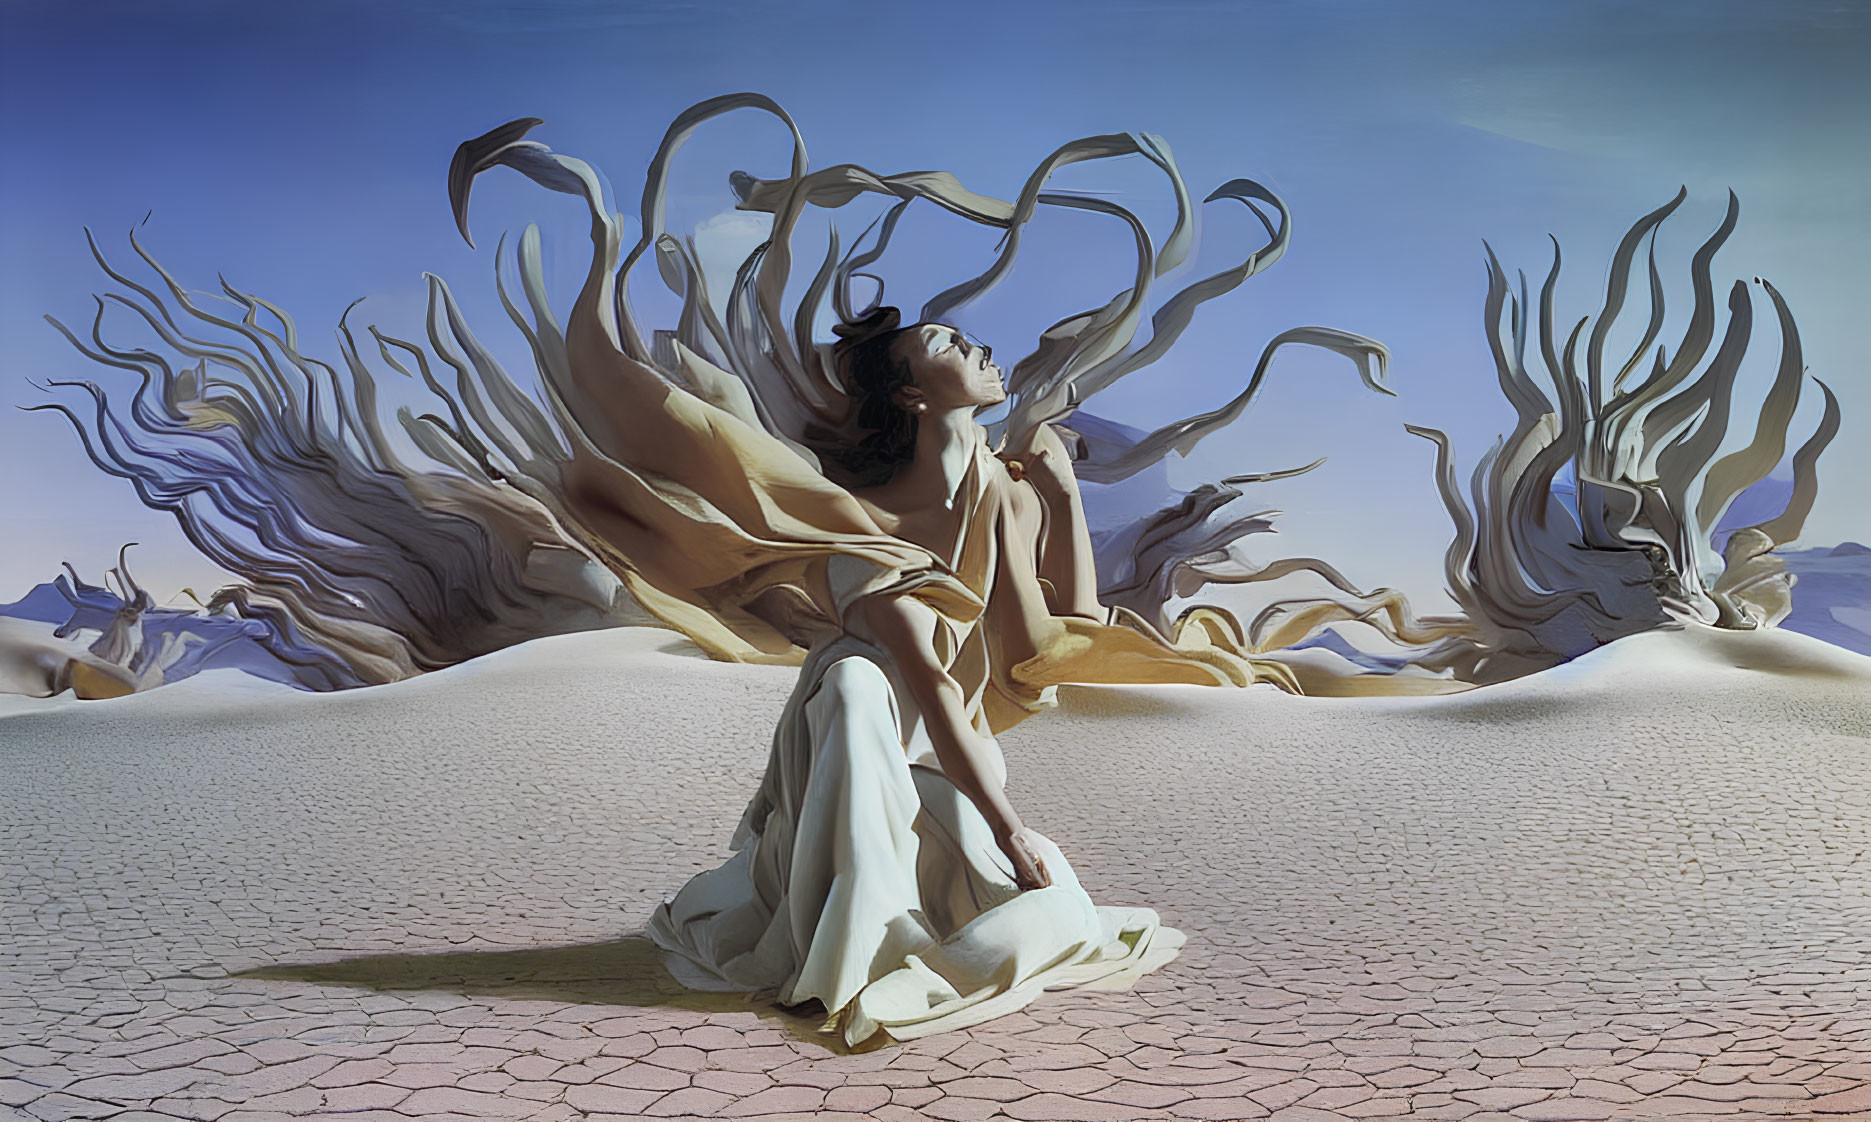 Woman in elegant dress surrounded by surreal tree-like forms on cracked desert floor